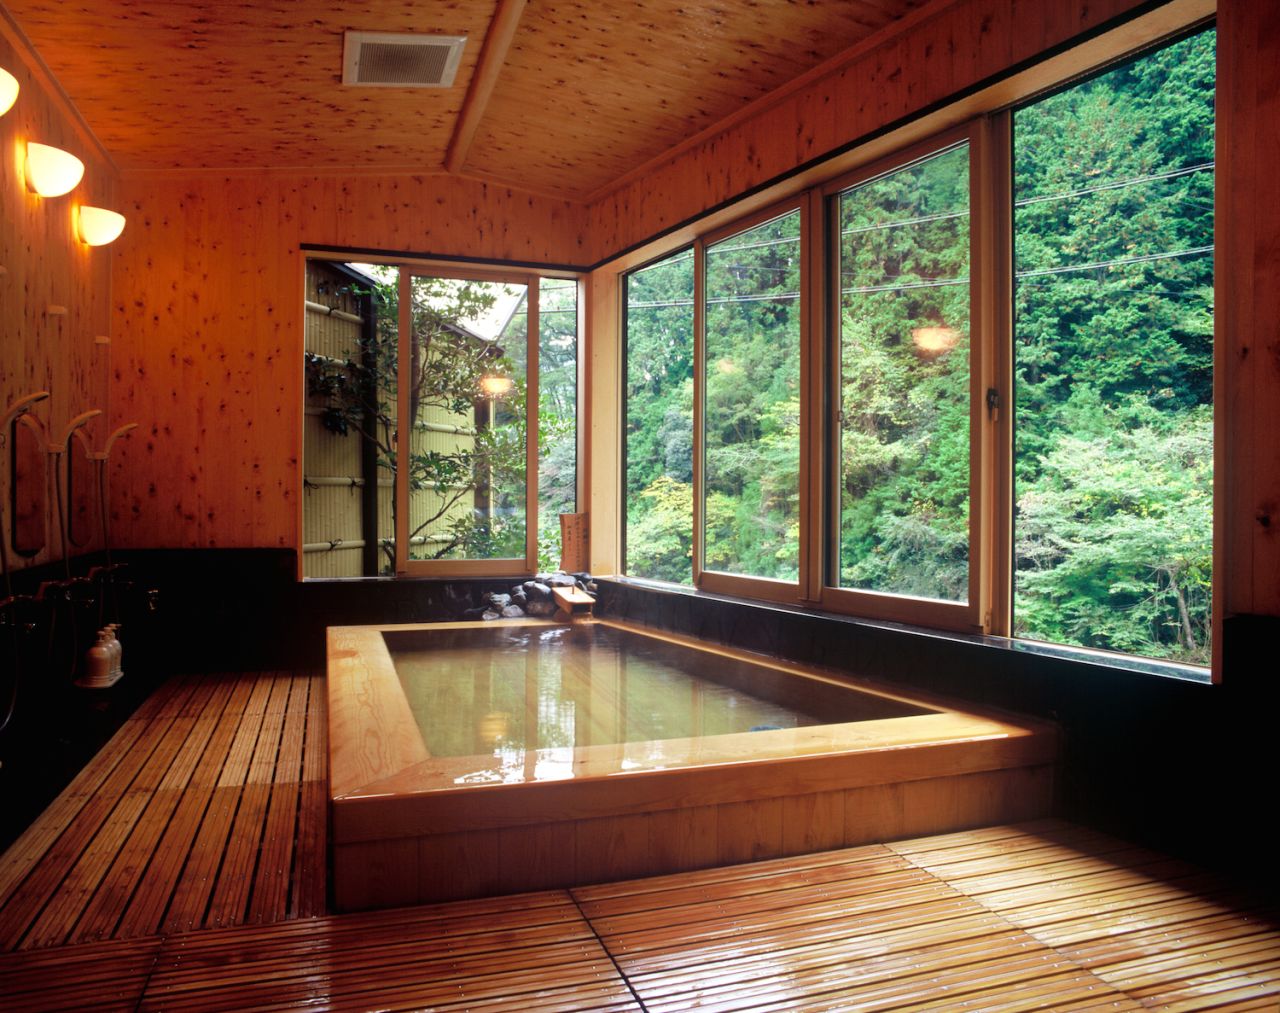 The onsen water at Wakayama's Kamigoten Ryokan is said to have high quantities of sodium bicarbonate, which leaves a silky, soft film on the skin.